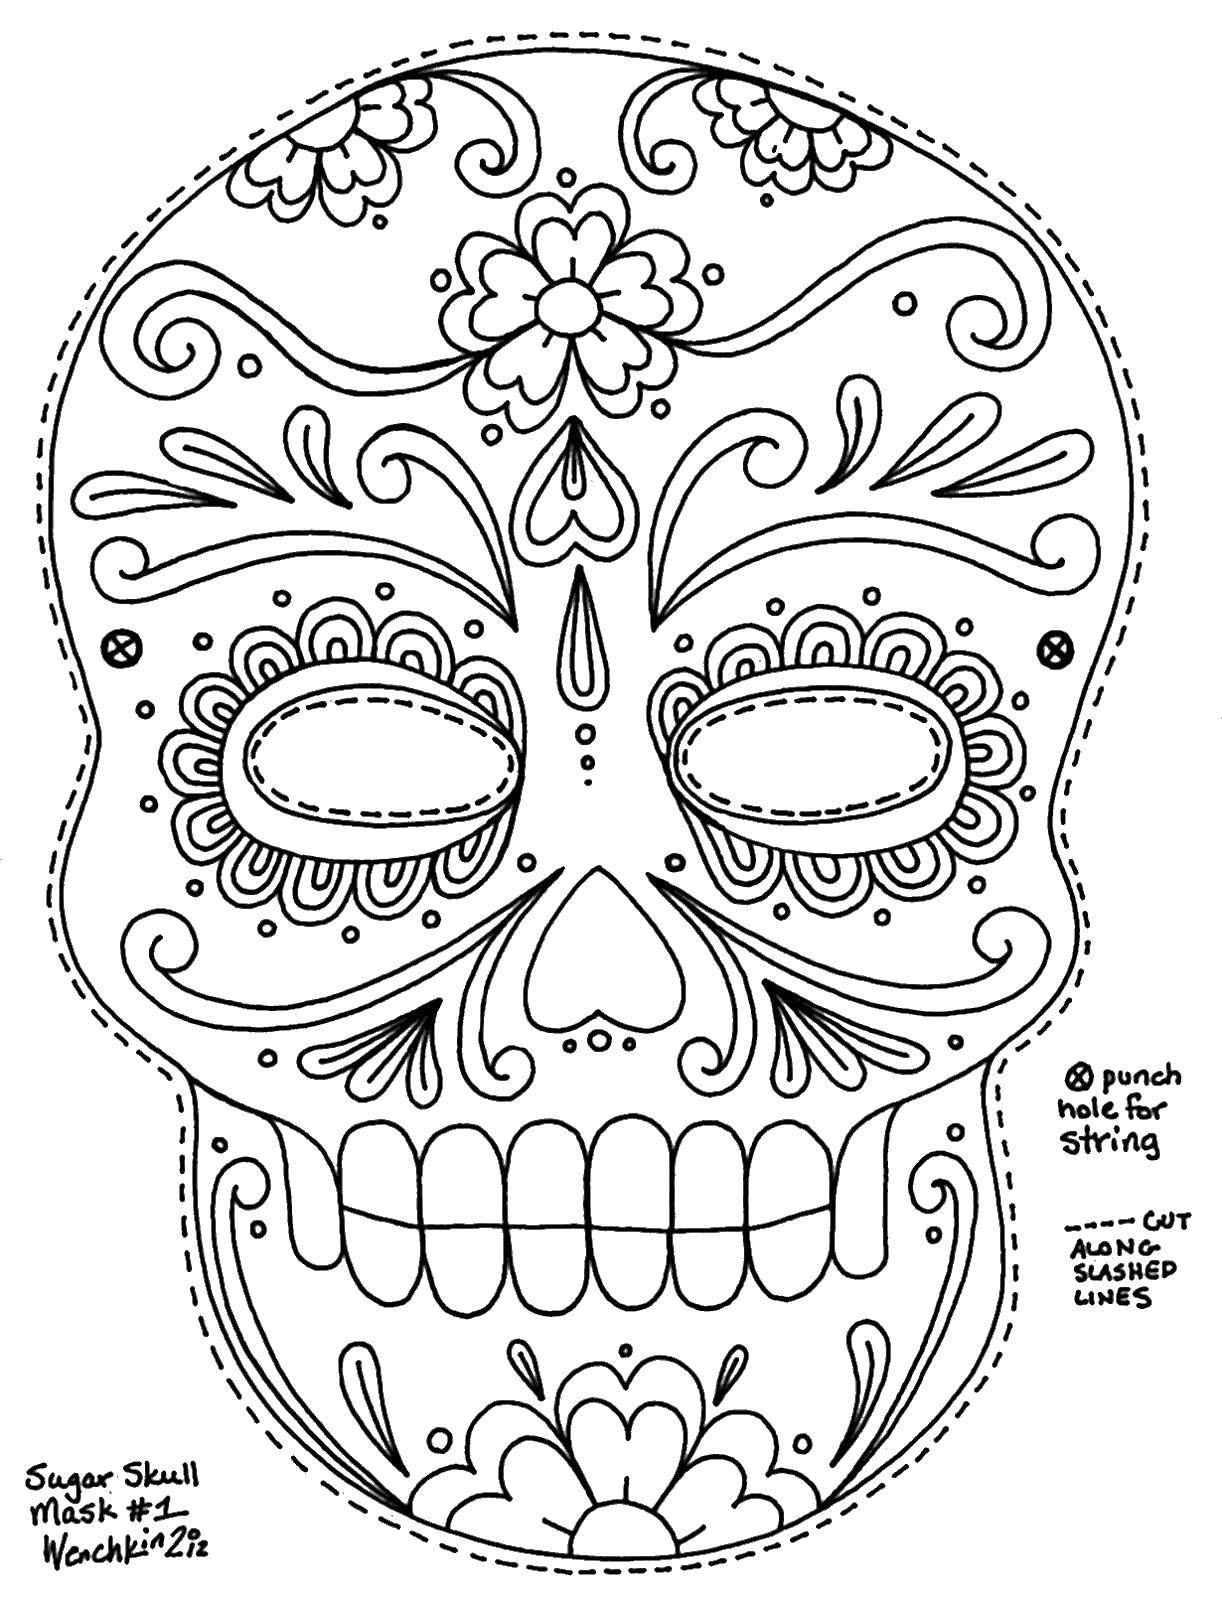 Coloring Painted skull. Category Skull. Tags:  skull, flowers, patterns.